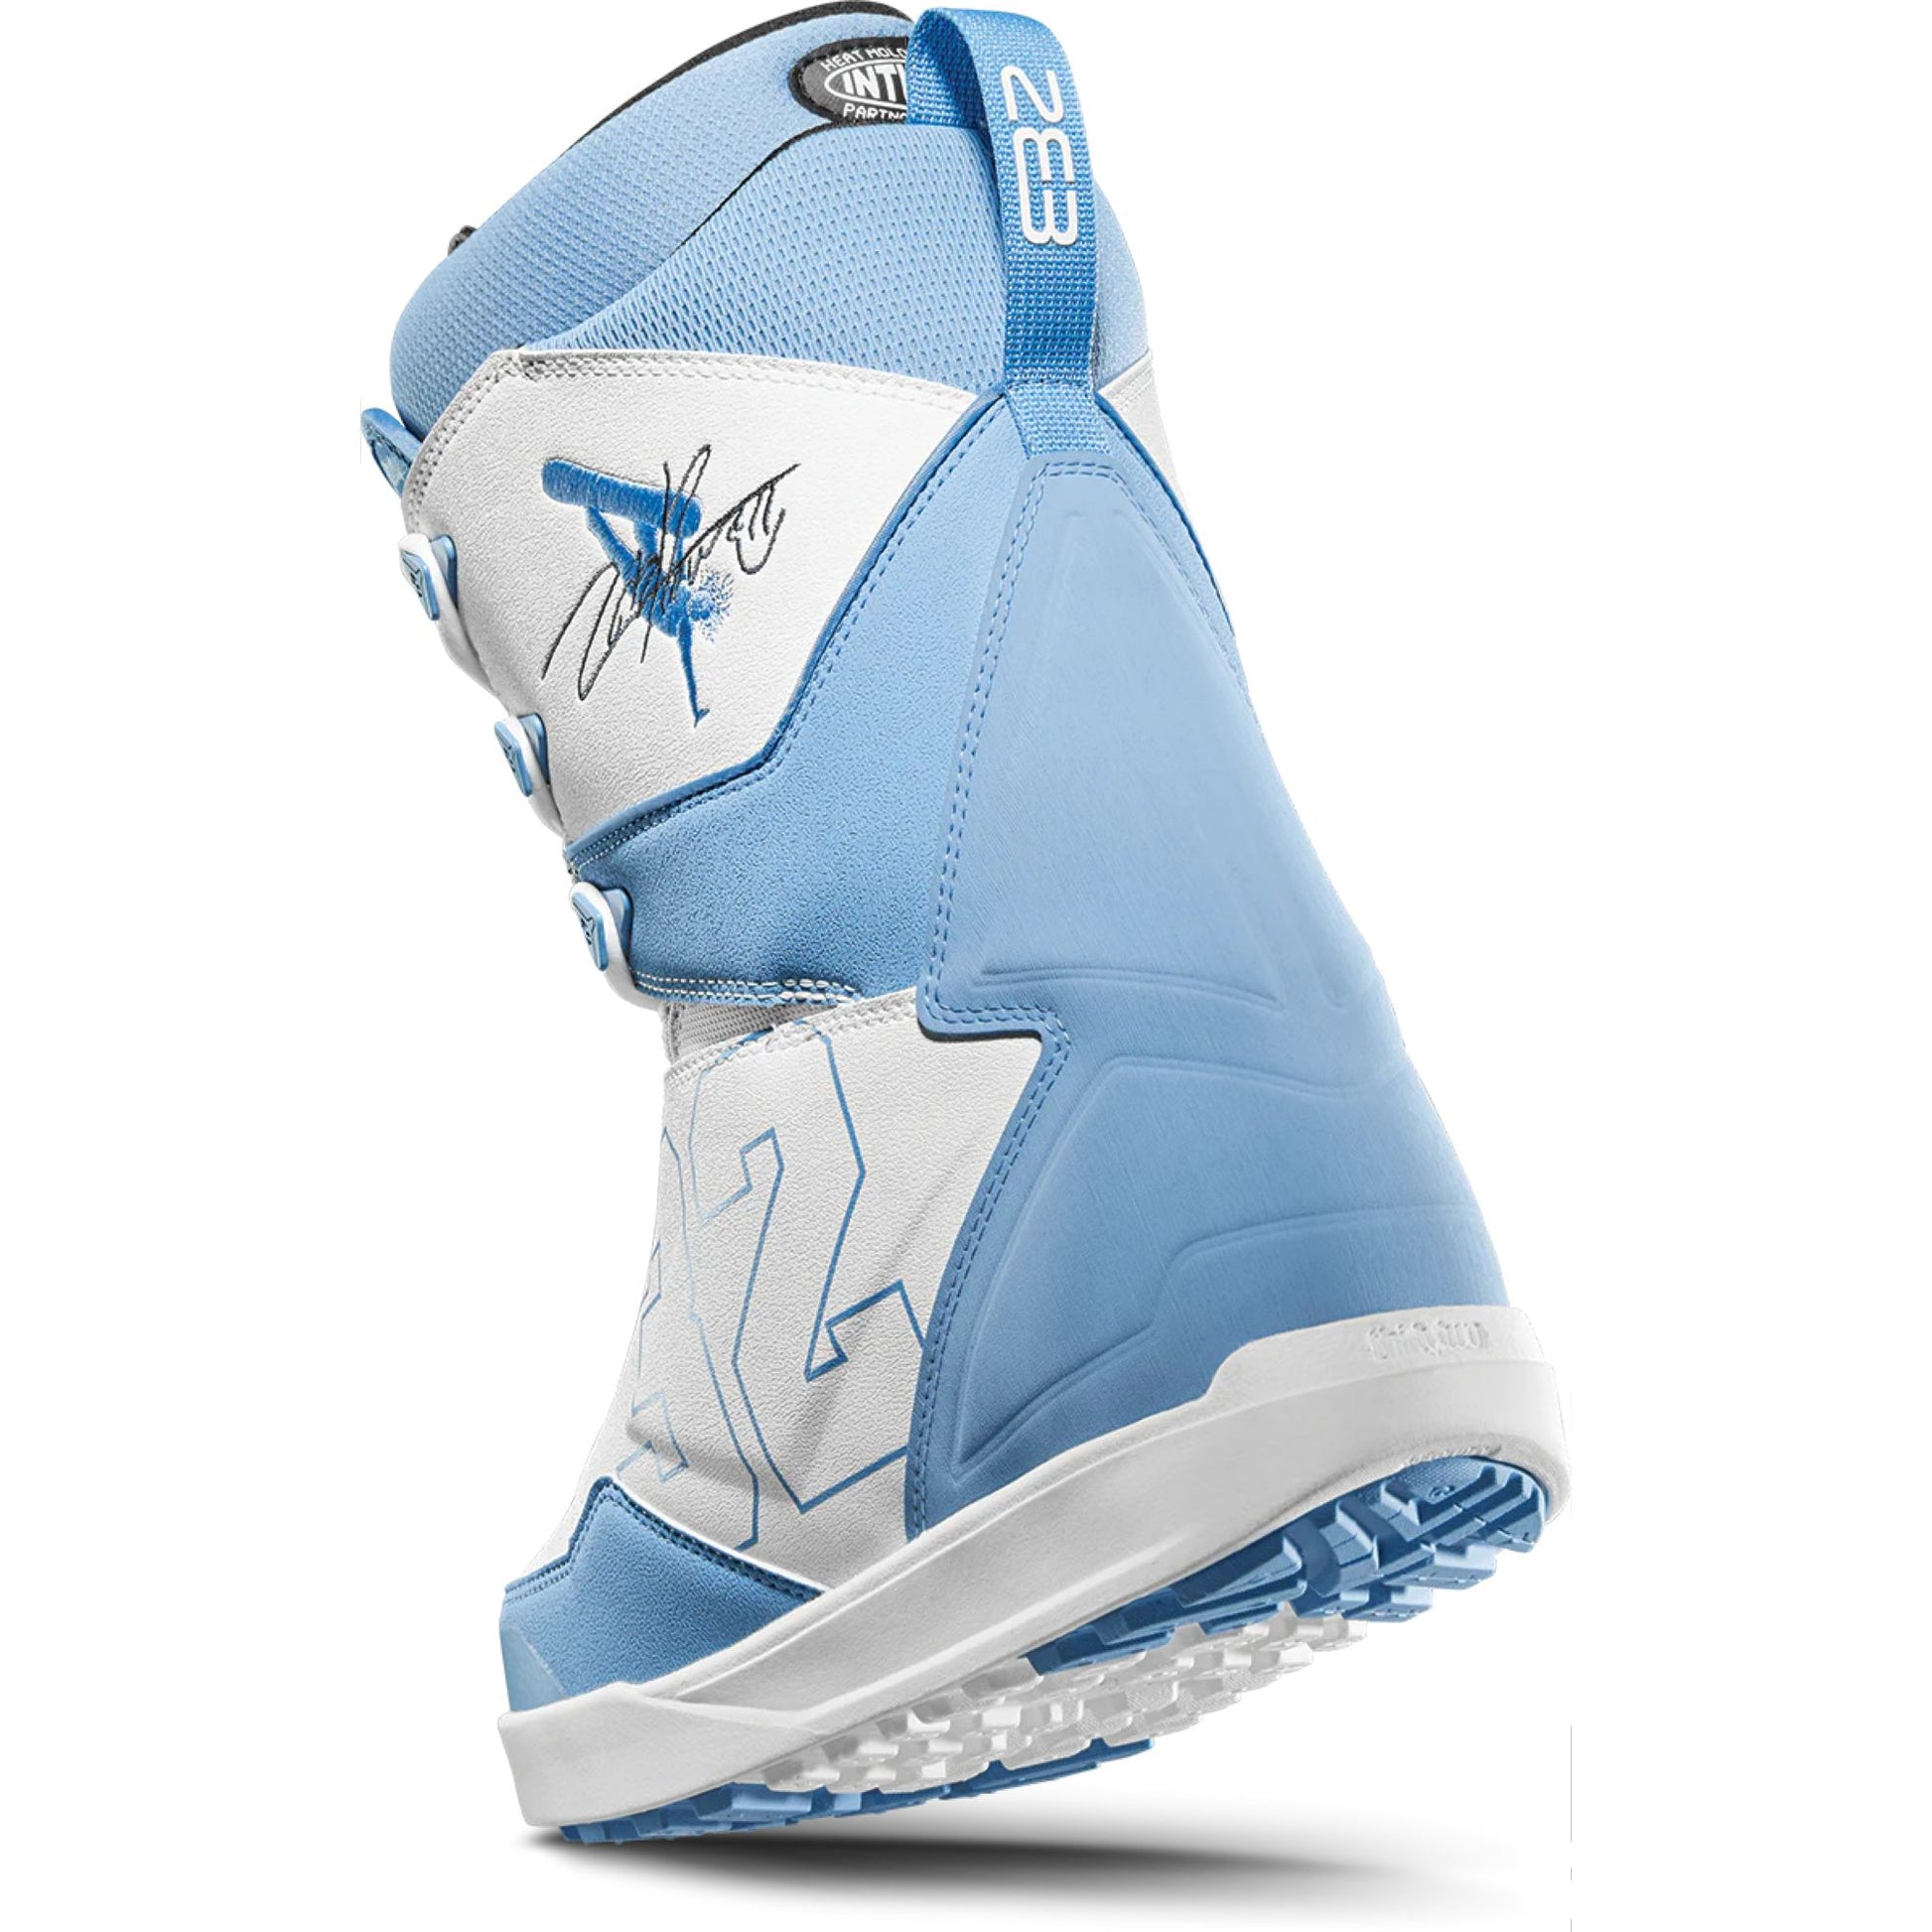 ThirtyTwo Lashed Powell Snowboard Boots Blue/White Snowboard Boots